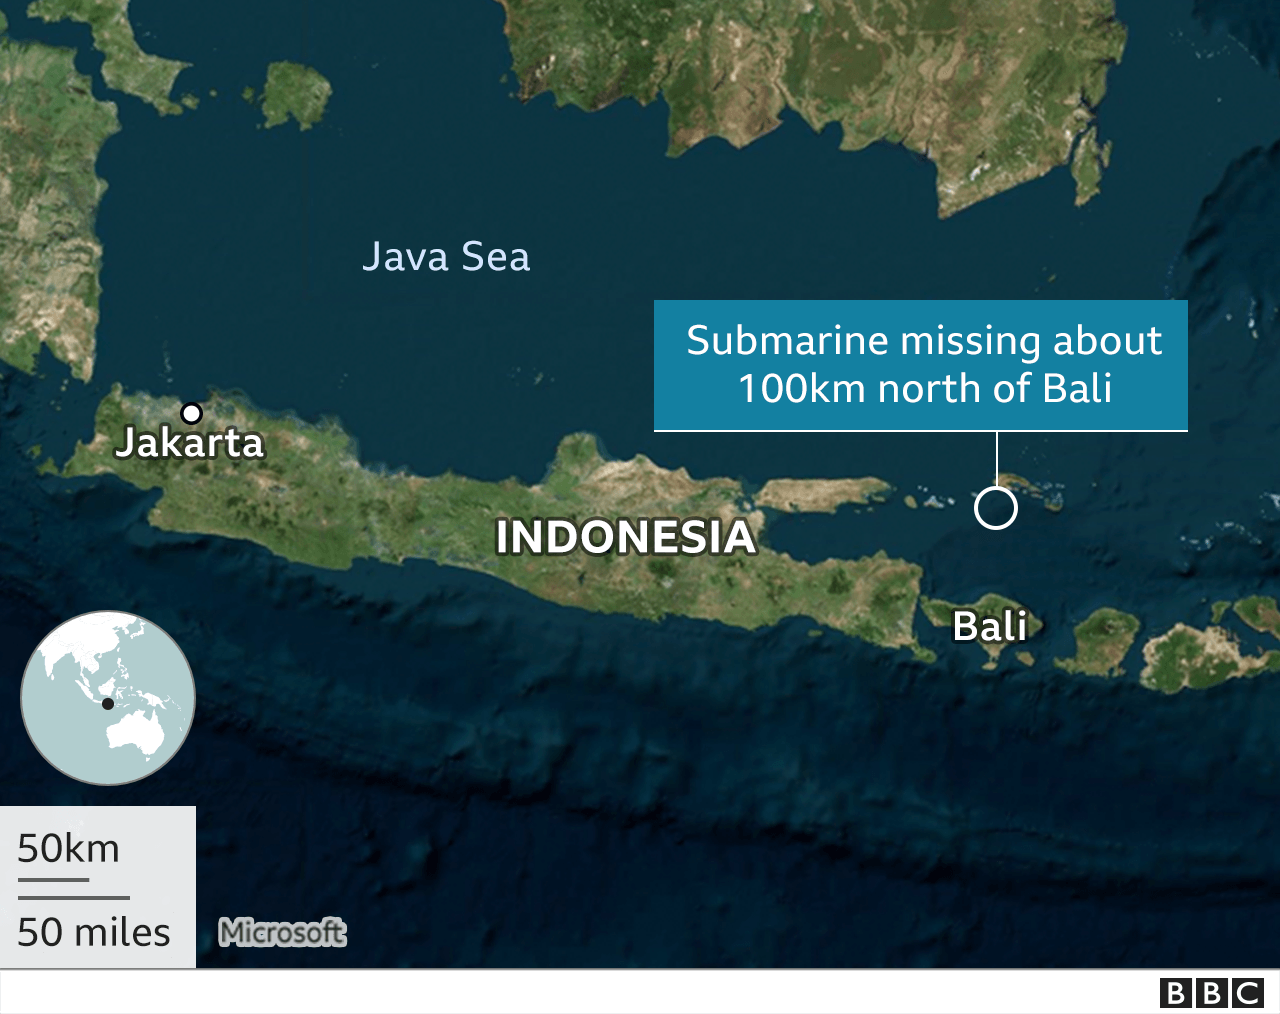 Here is where authorities are searching for the missing submarine